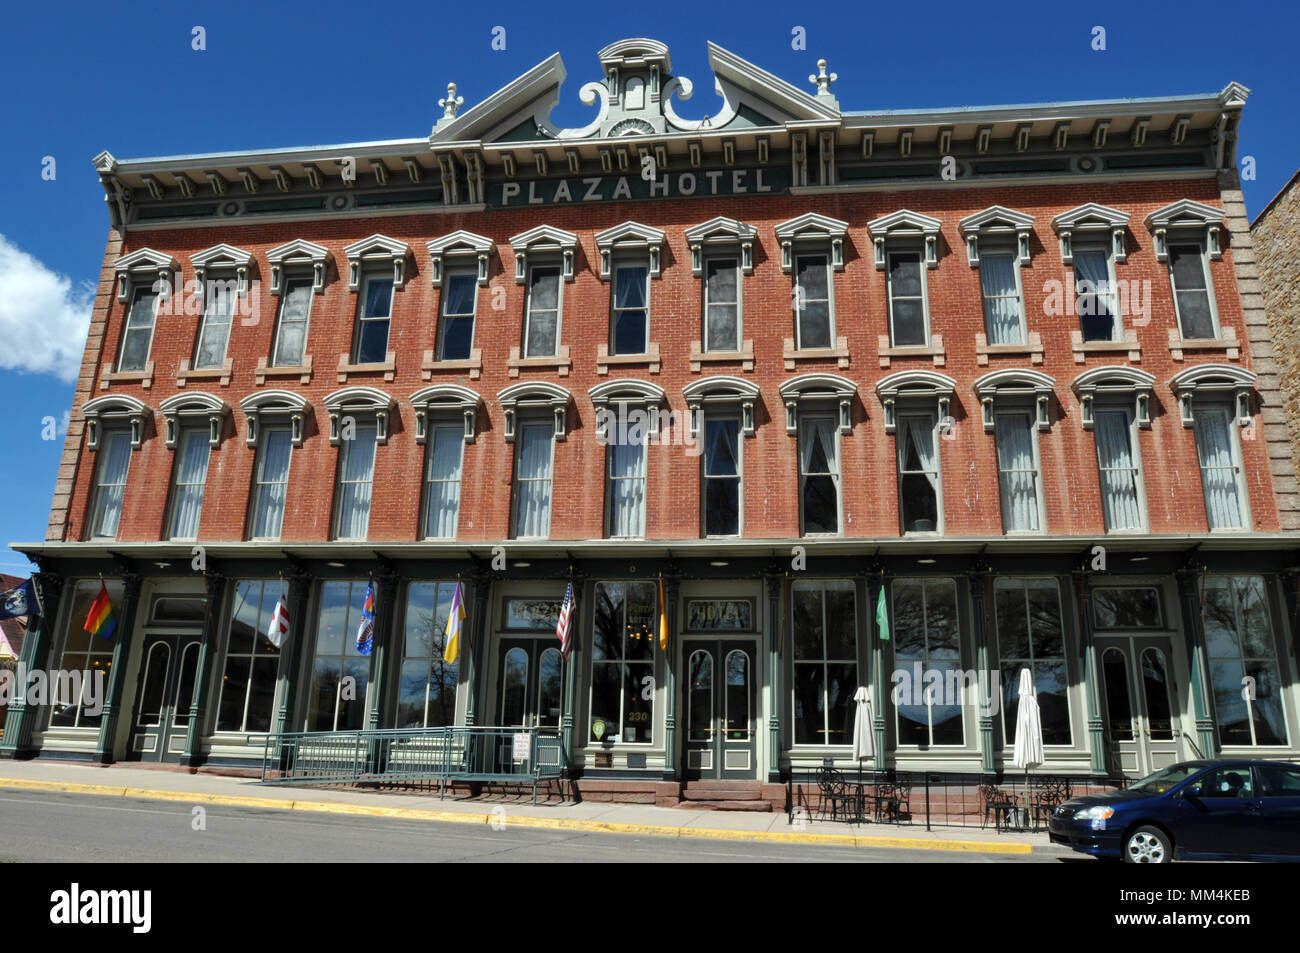 The landmark Plaza Hotel in Las Vegas, New Mexico, opened in 1882 and has featured in several films including 2007's No Country for Old Men. Stock Photo